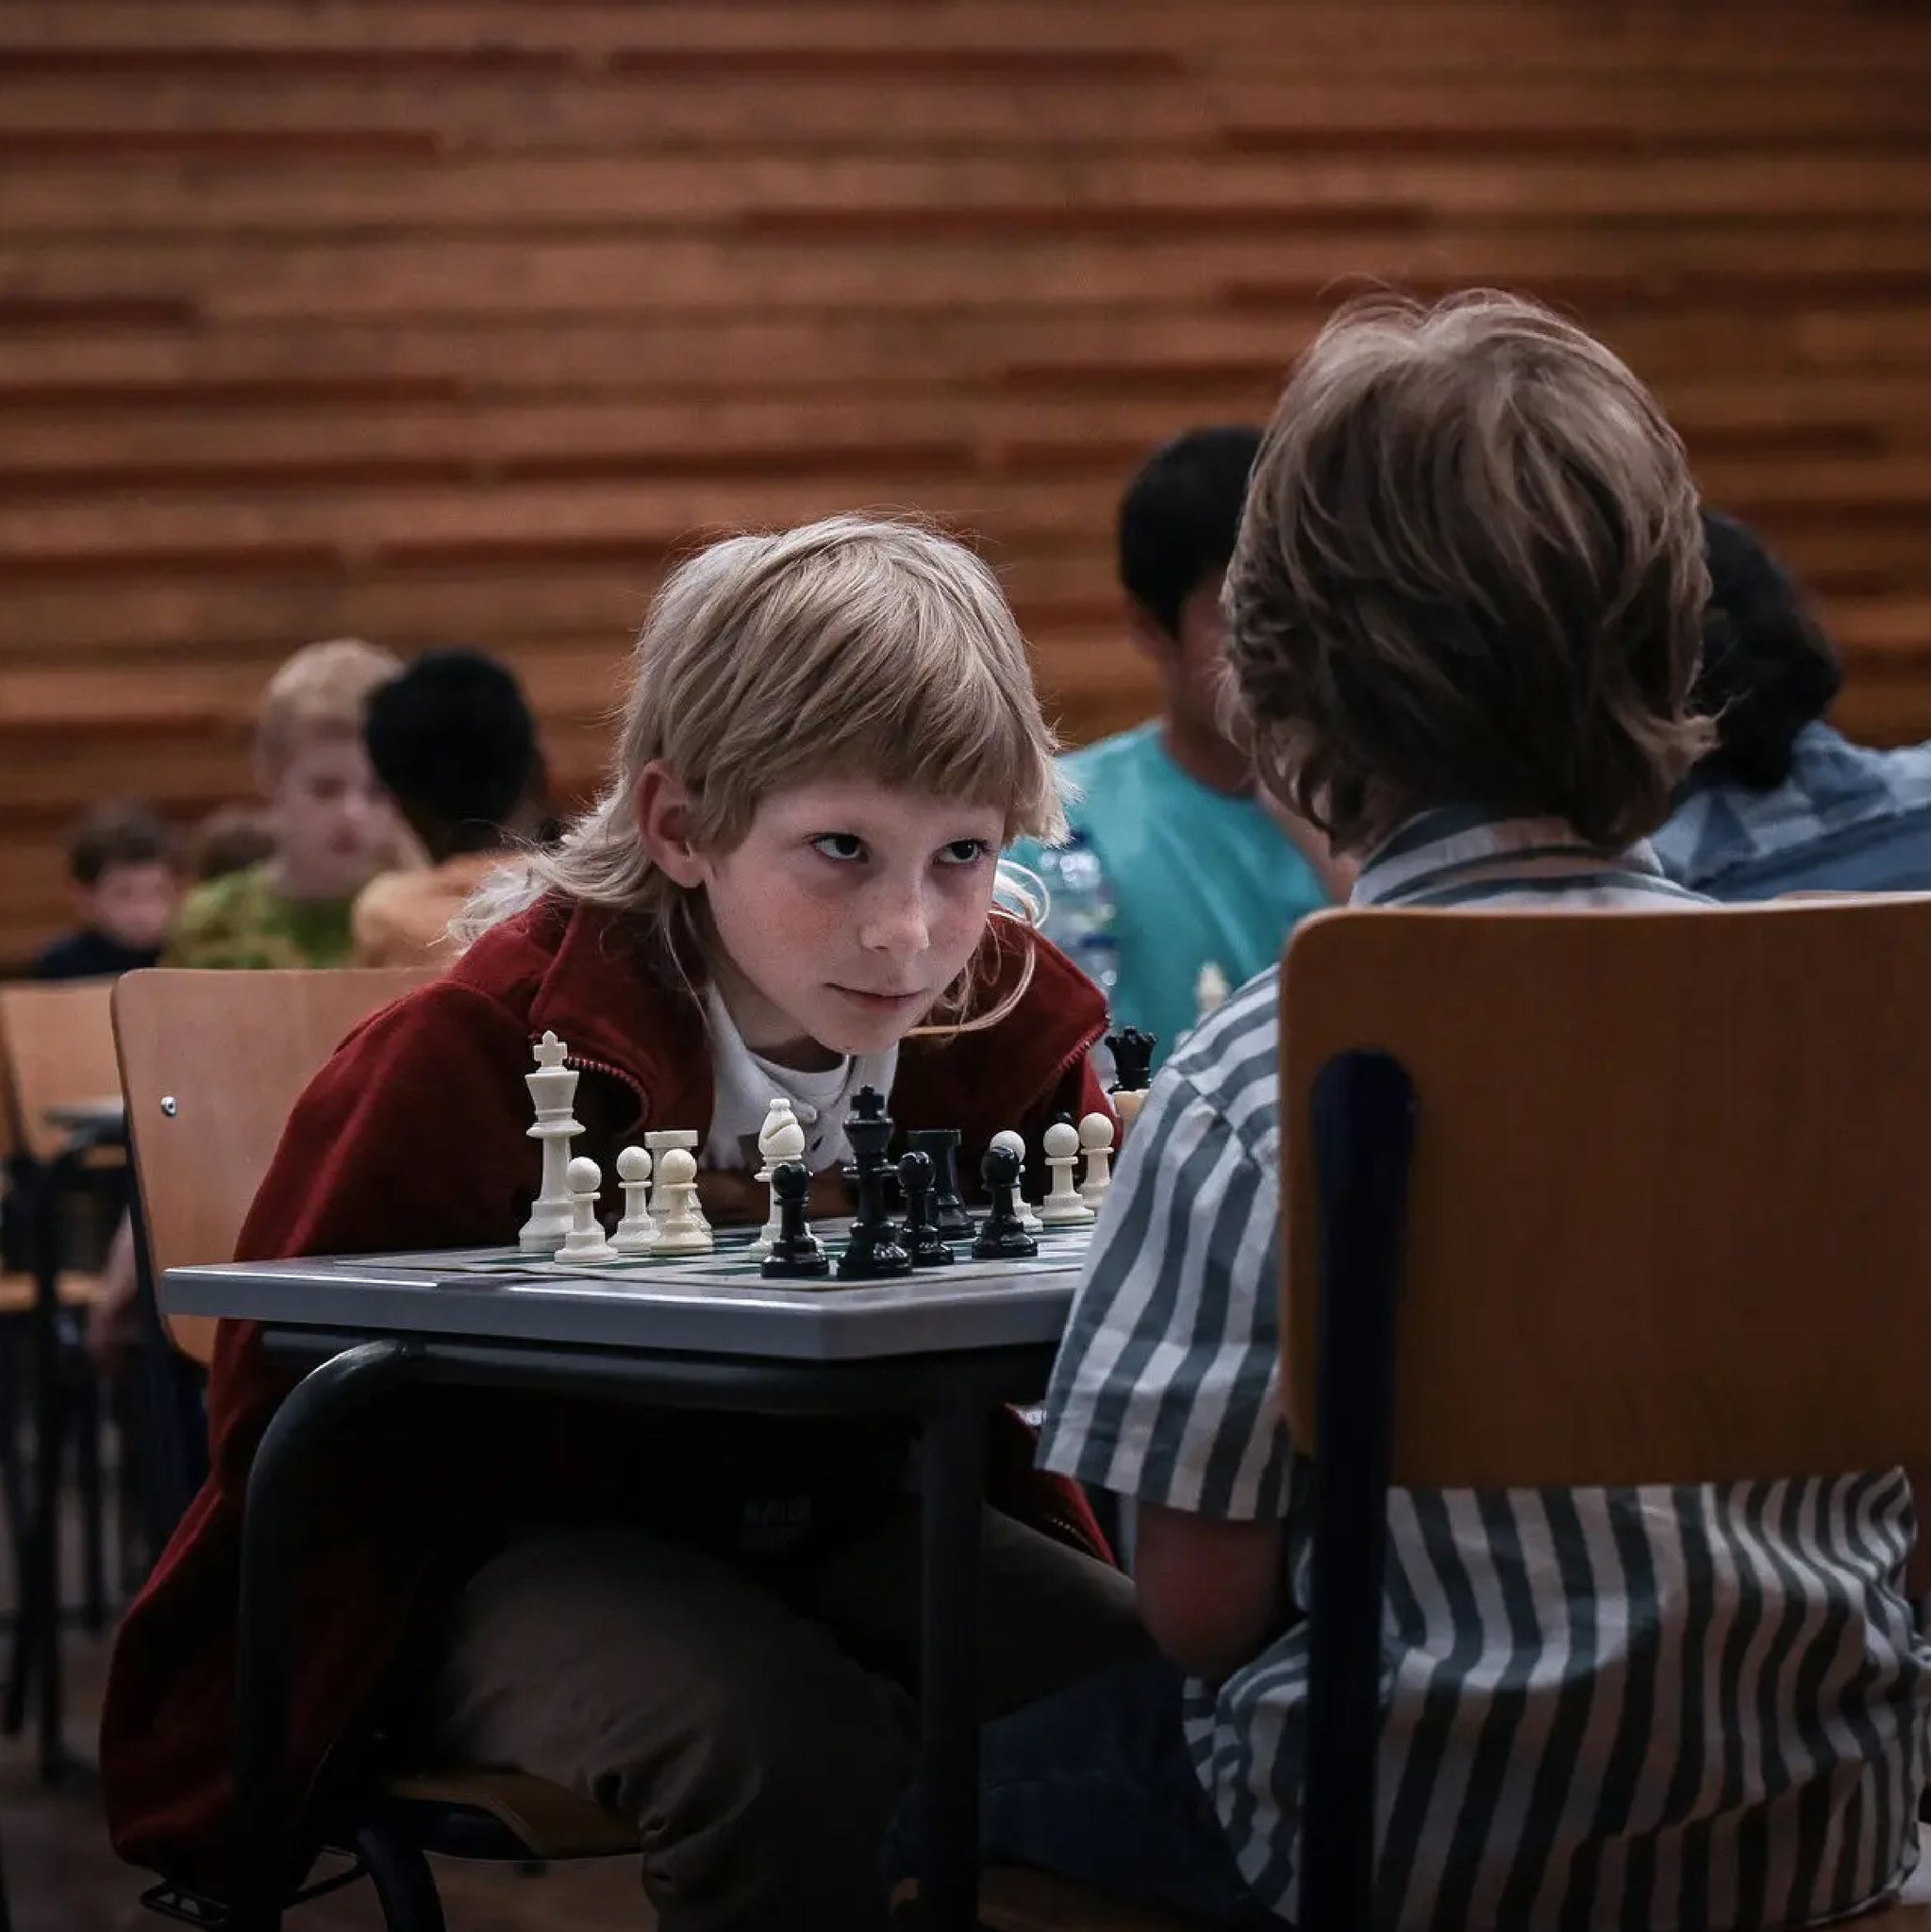 “I made a checkmate” ~ A new life and a quest to be grandmaster.